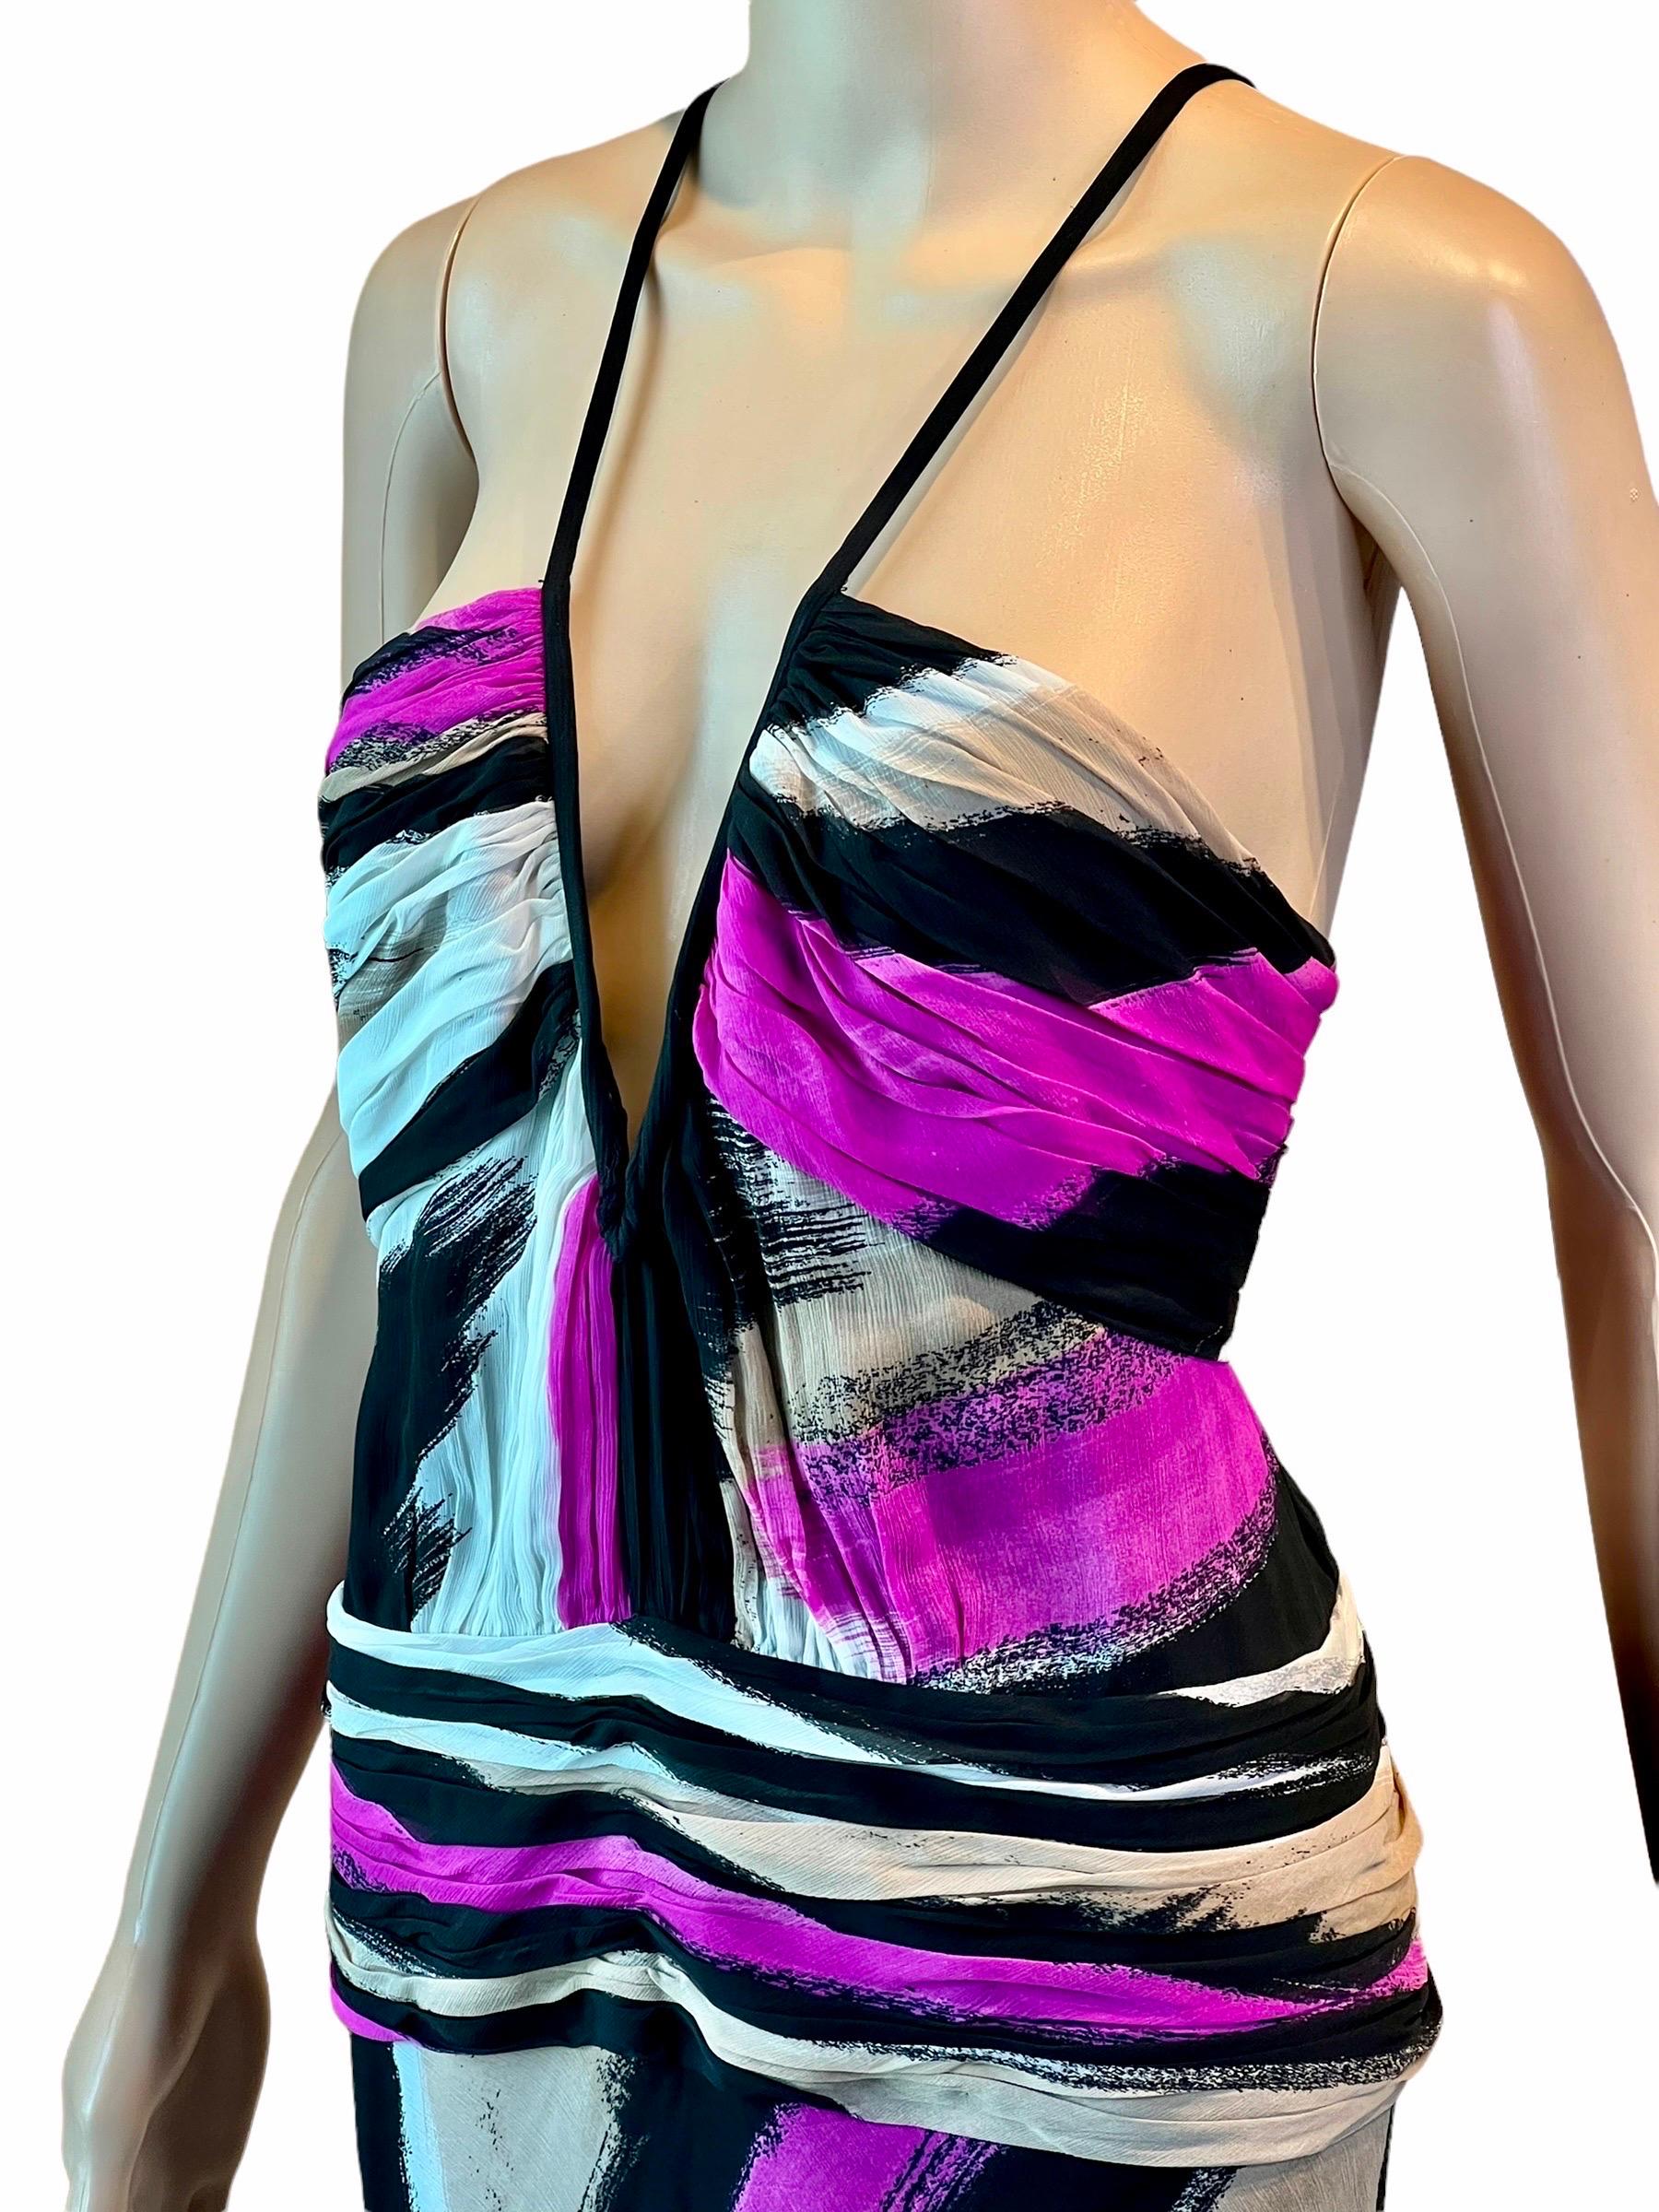 Women's Gianni Versace F/W 2001 Runway Plunging Neckline Geometric Abstract Print Dress For Sale